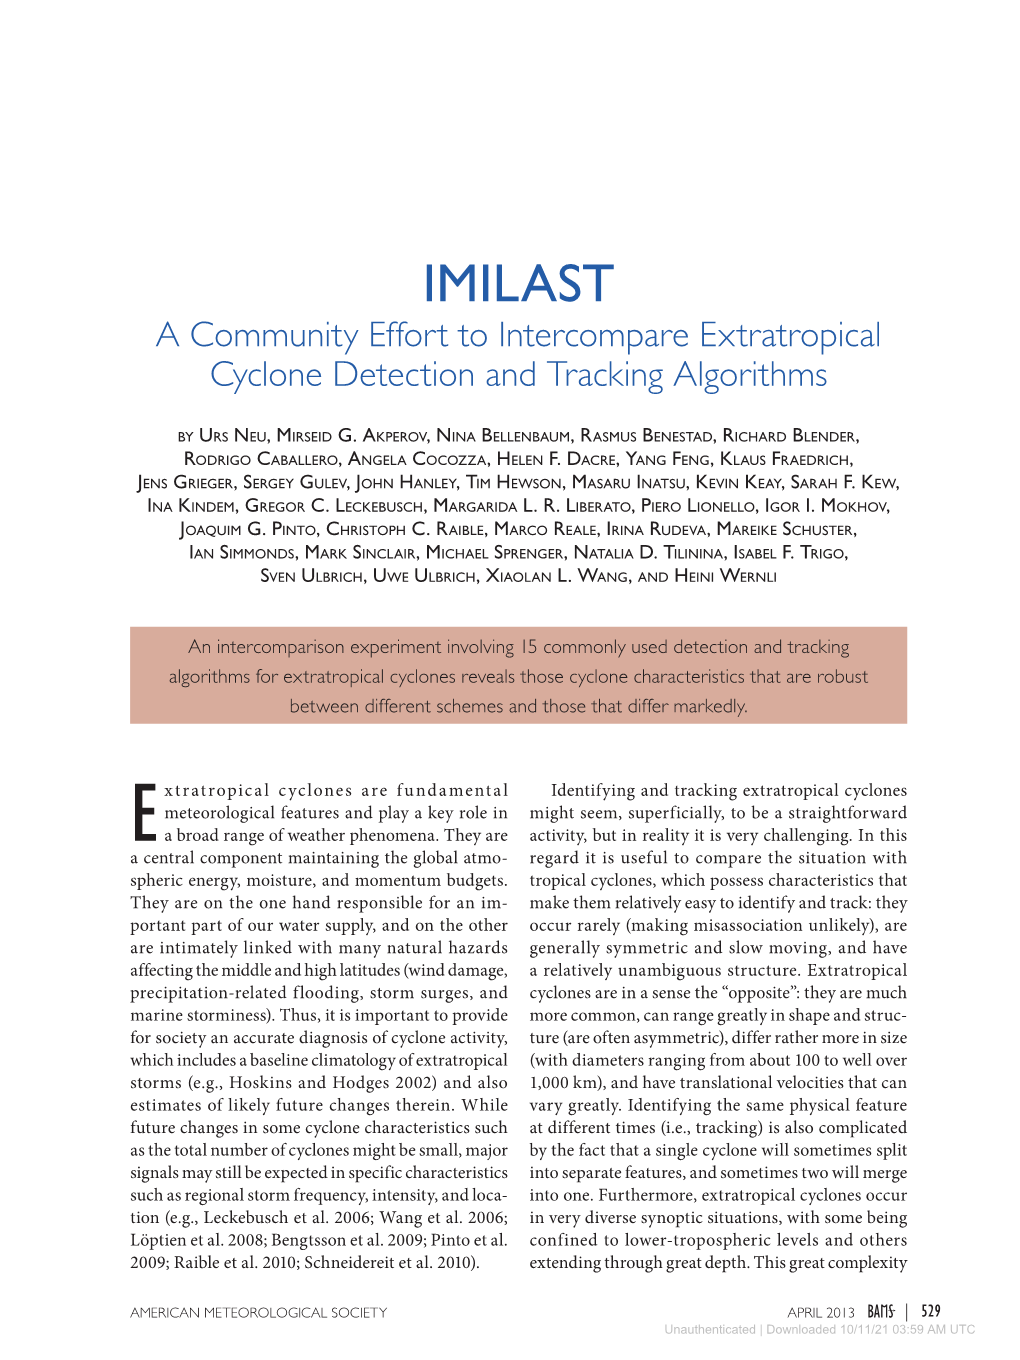 IMILAST a Community Effort to Intercompare Extratropical Cyclone Detection and Tracking Algorithms